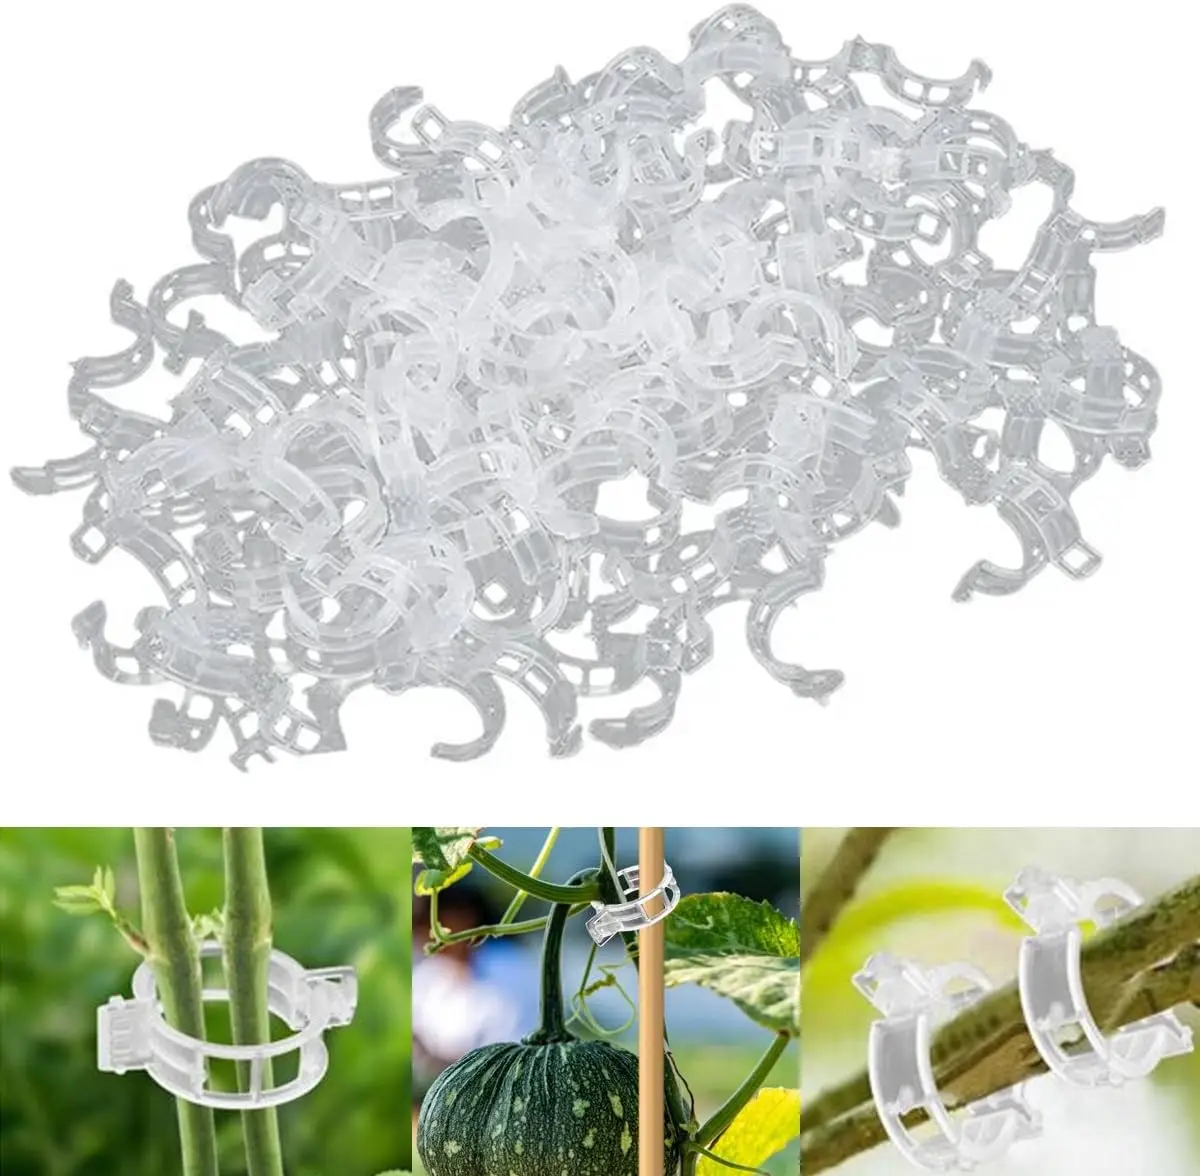 

100 PCS Secured Plastic Plant Clip,Upgrade Plant Support Clips,Garden Clips for Climbing Plants,Plant Support Clips Plant Fixing